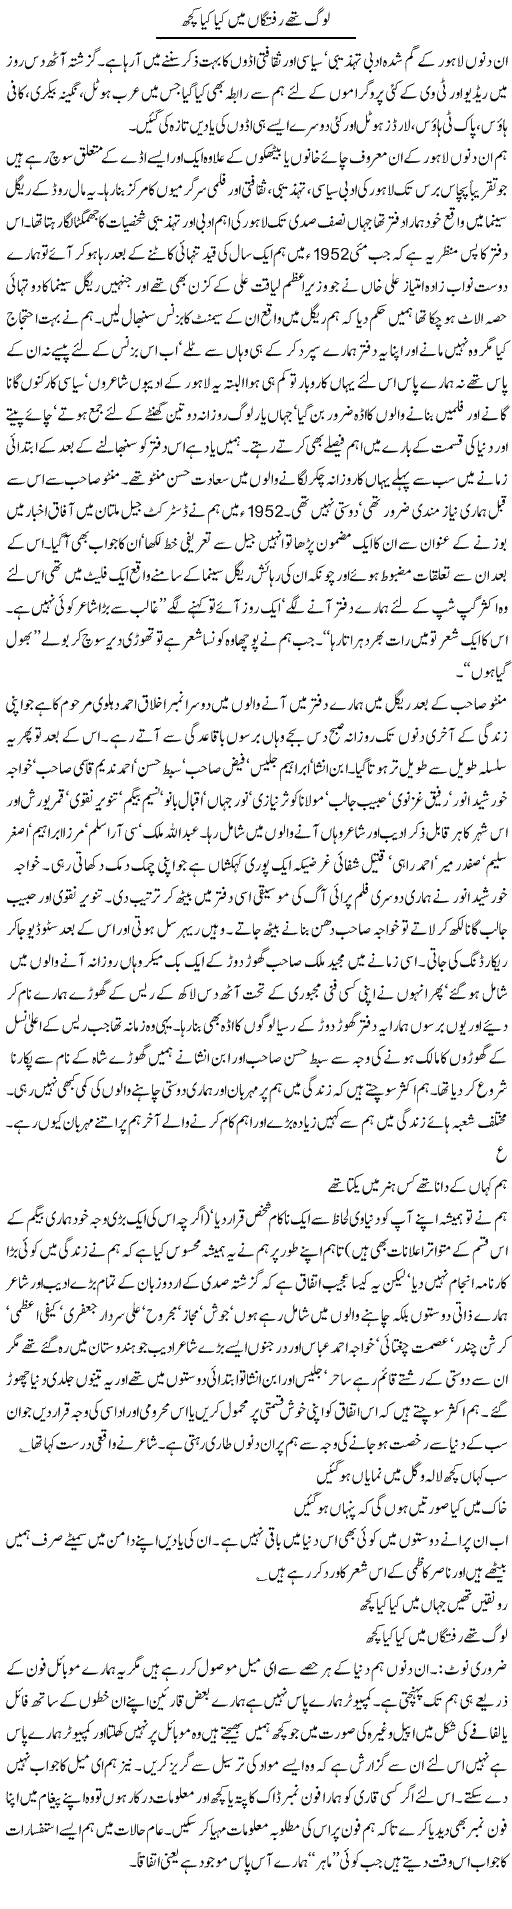 Cultural Places Express Column Hameed Akhtar 1 February 2011